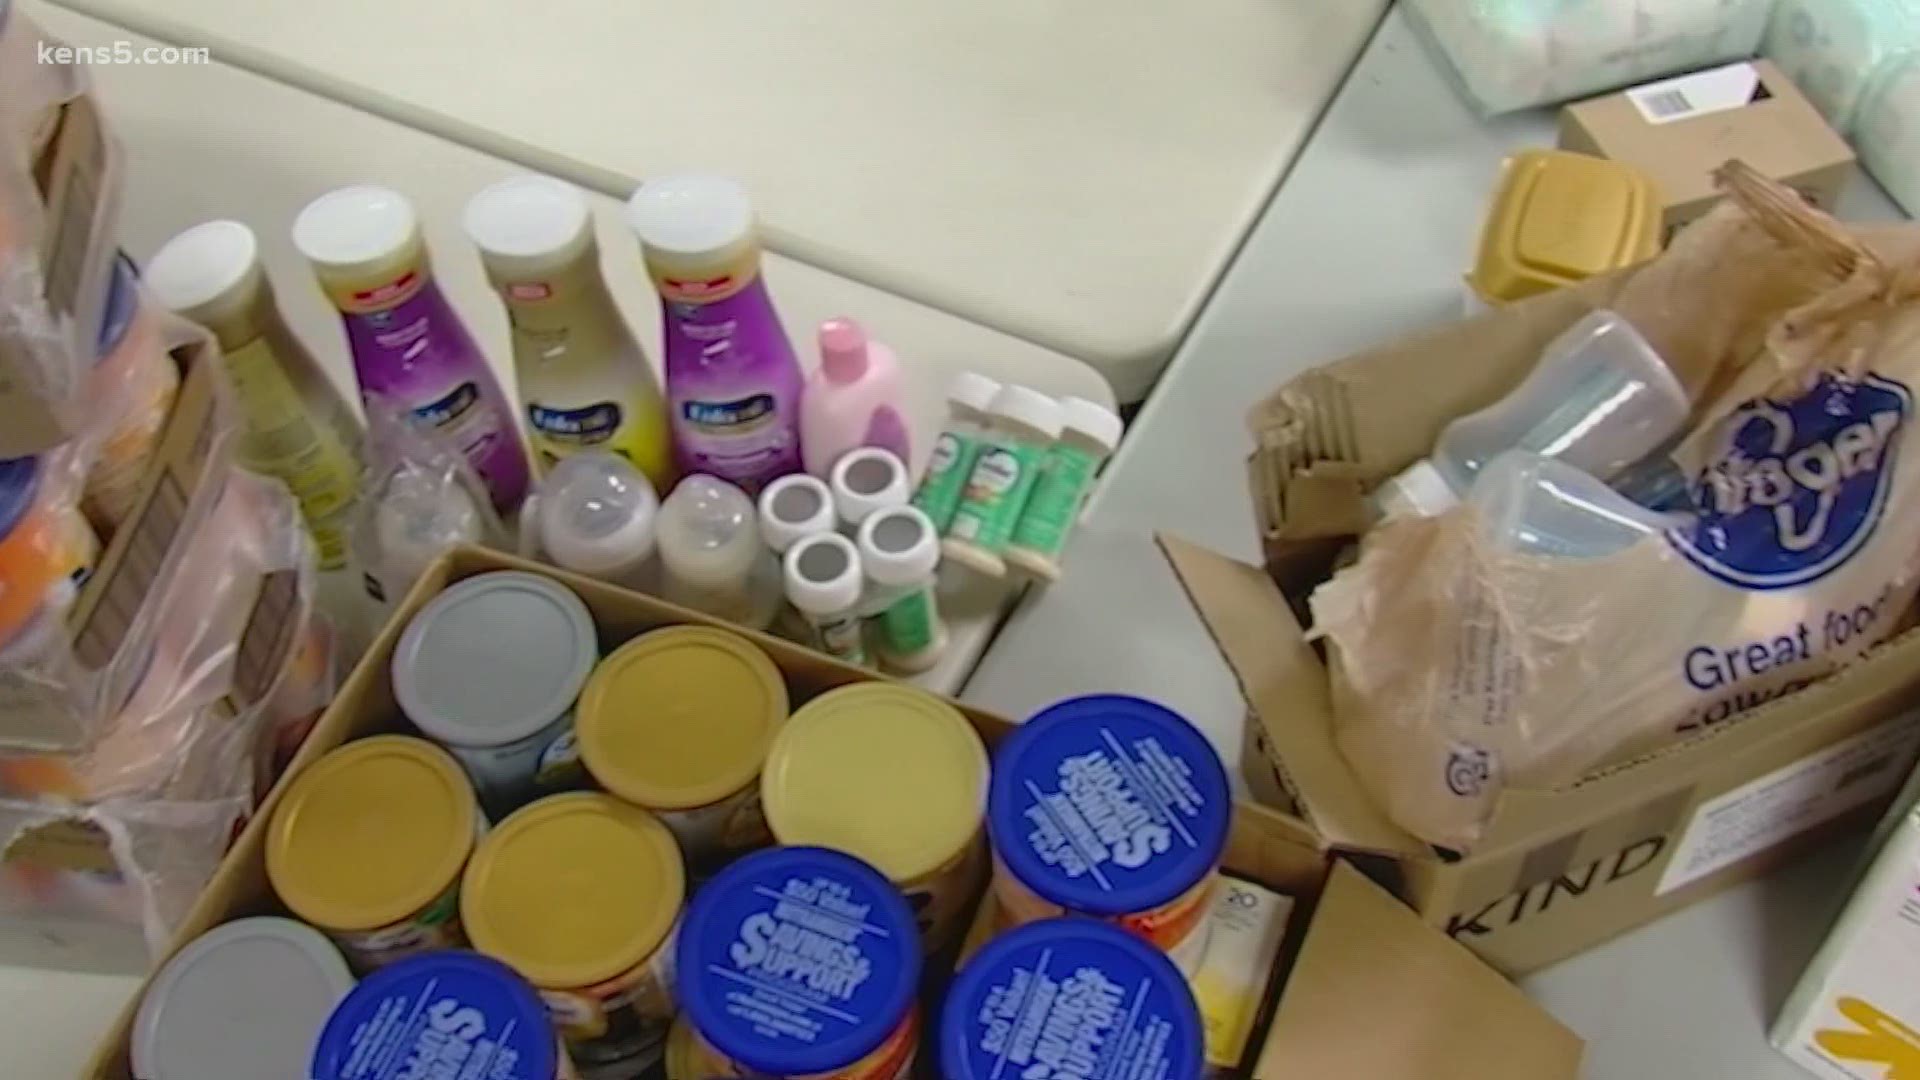 Two organizations are working to help families get the formula, food and supplies they need to care for children.